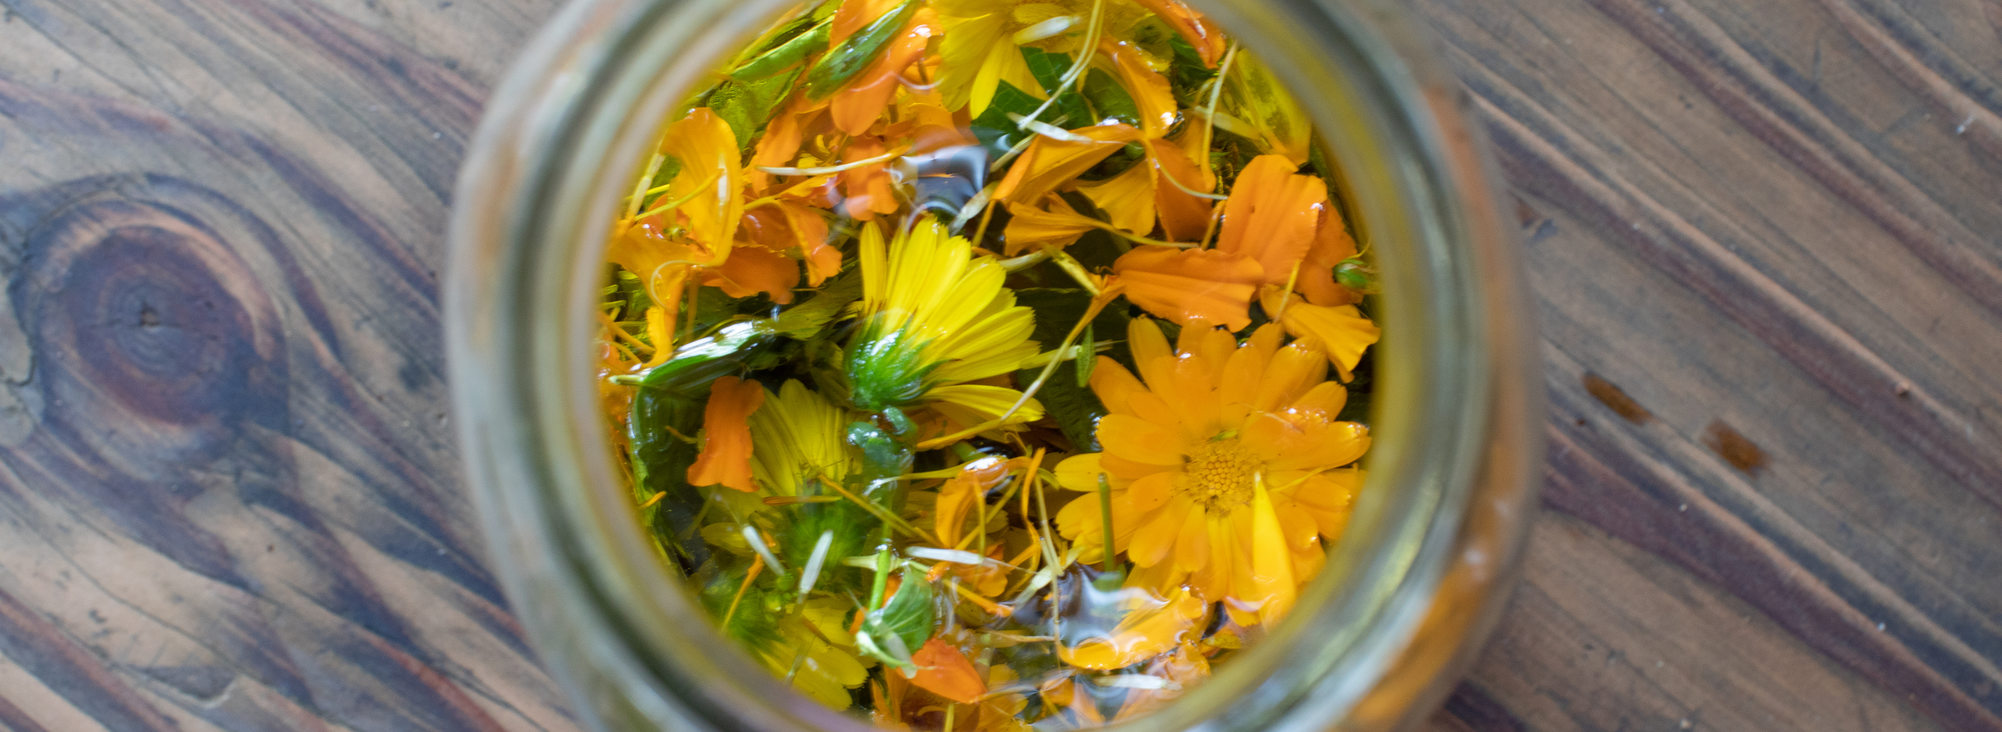 A mason jar full of bright orange and yellow flowers from Atabey Medicine Council